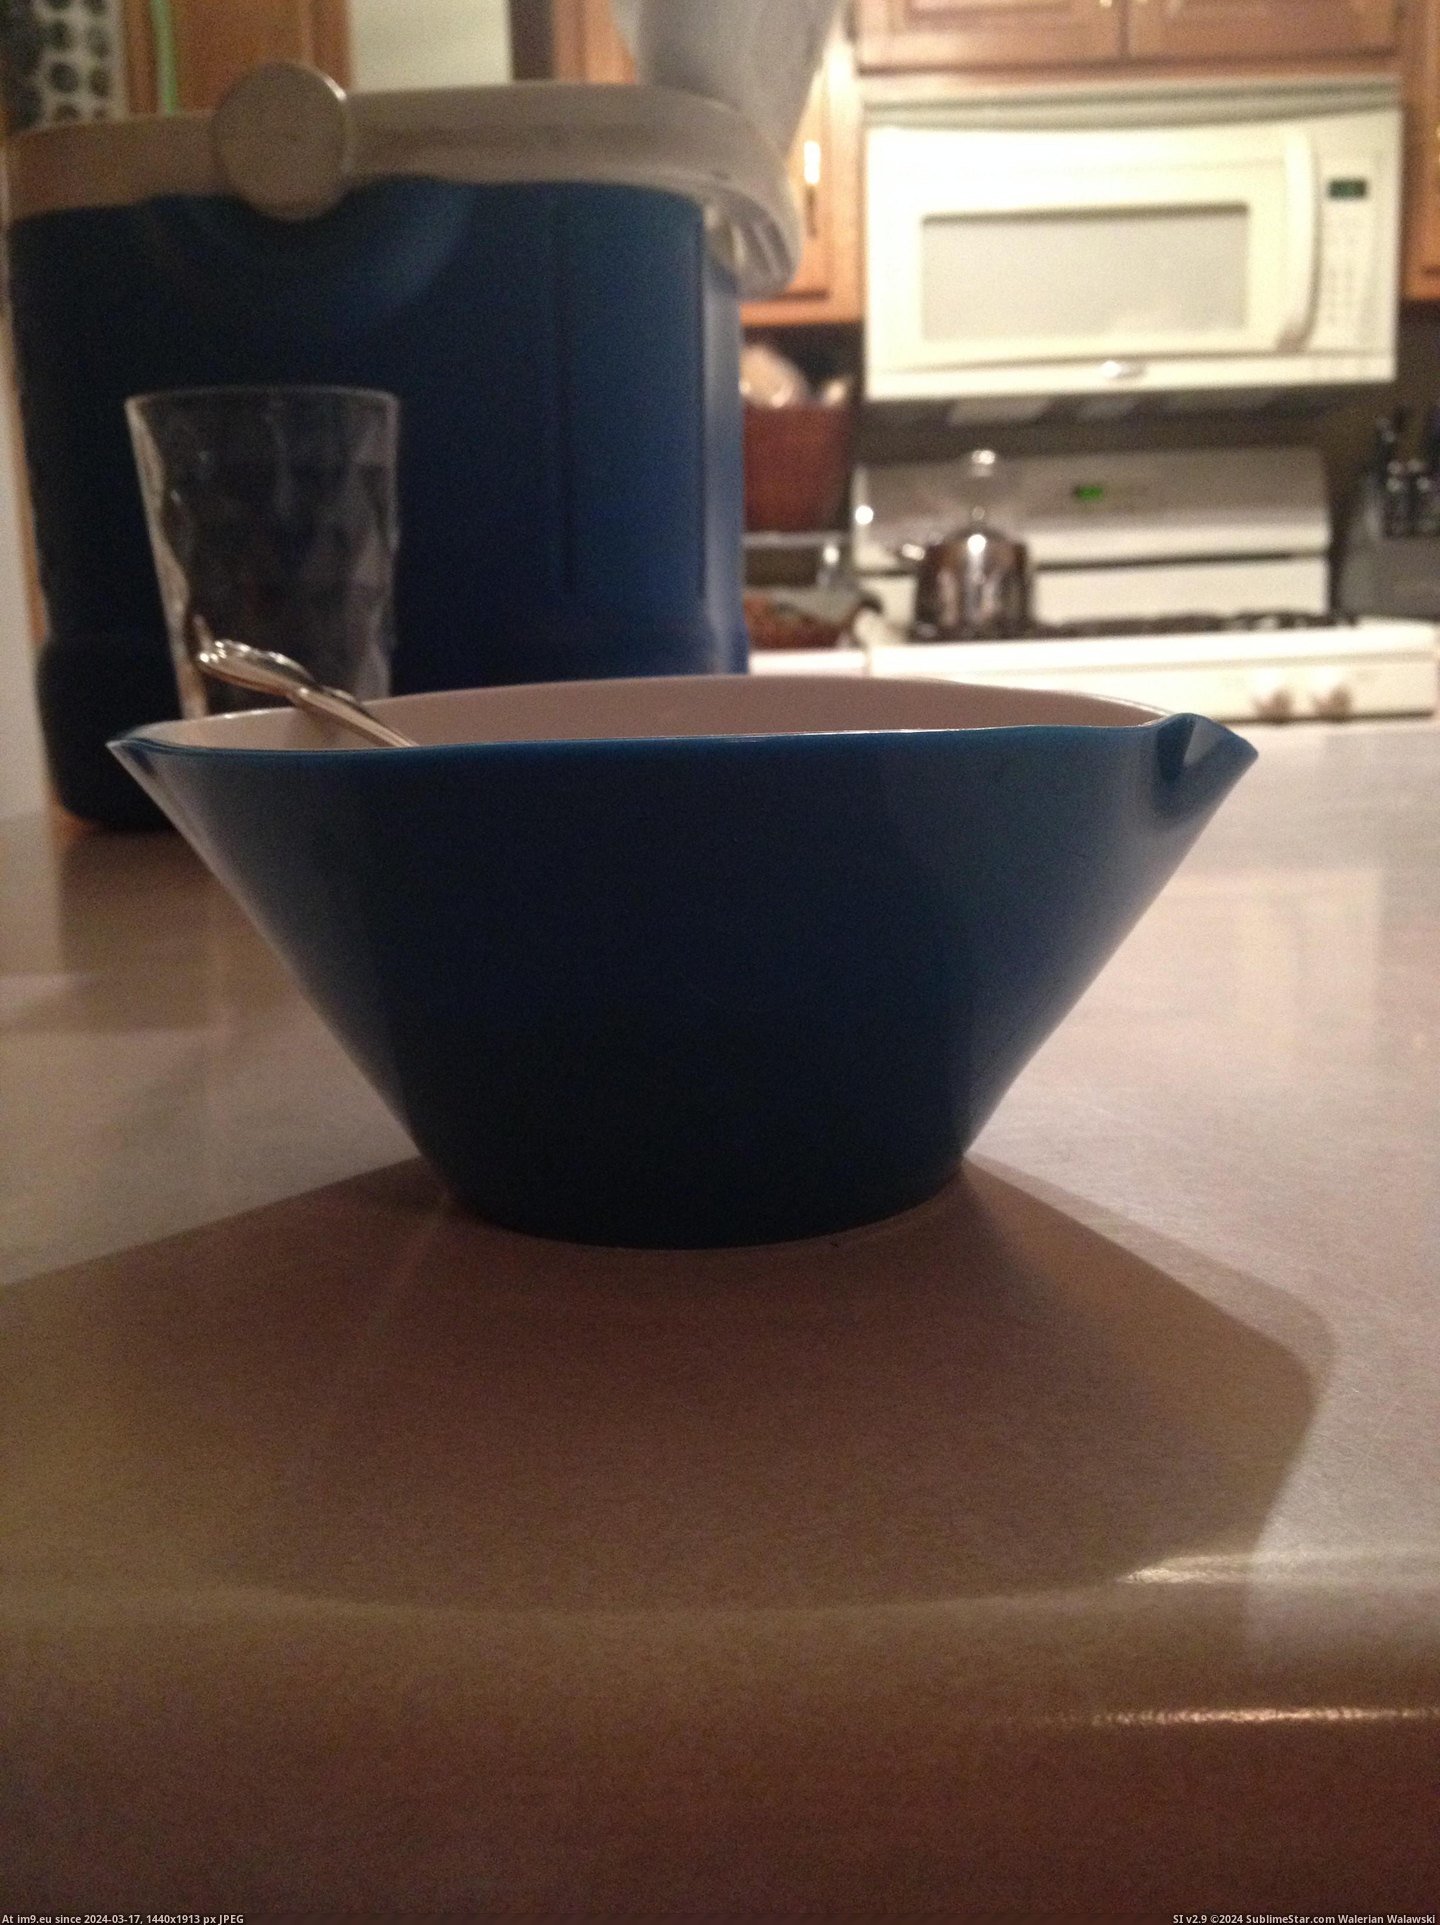 #Was #Perfect #Bowl #Spot #Circular #Sipping #Reformed #Shape #Cereal #Soo #Dishwasher [Mildlyinteresting] Soo my cereal bowl, normally circular in shape, was reformed by my dishwasher to make a perfect sipping spot Pic. (Image of album My r/MILDLYINTERESTING favs))